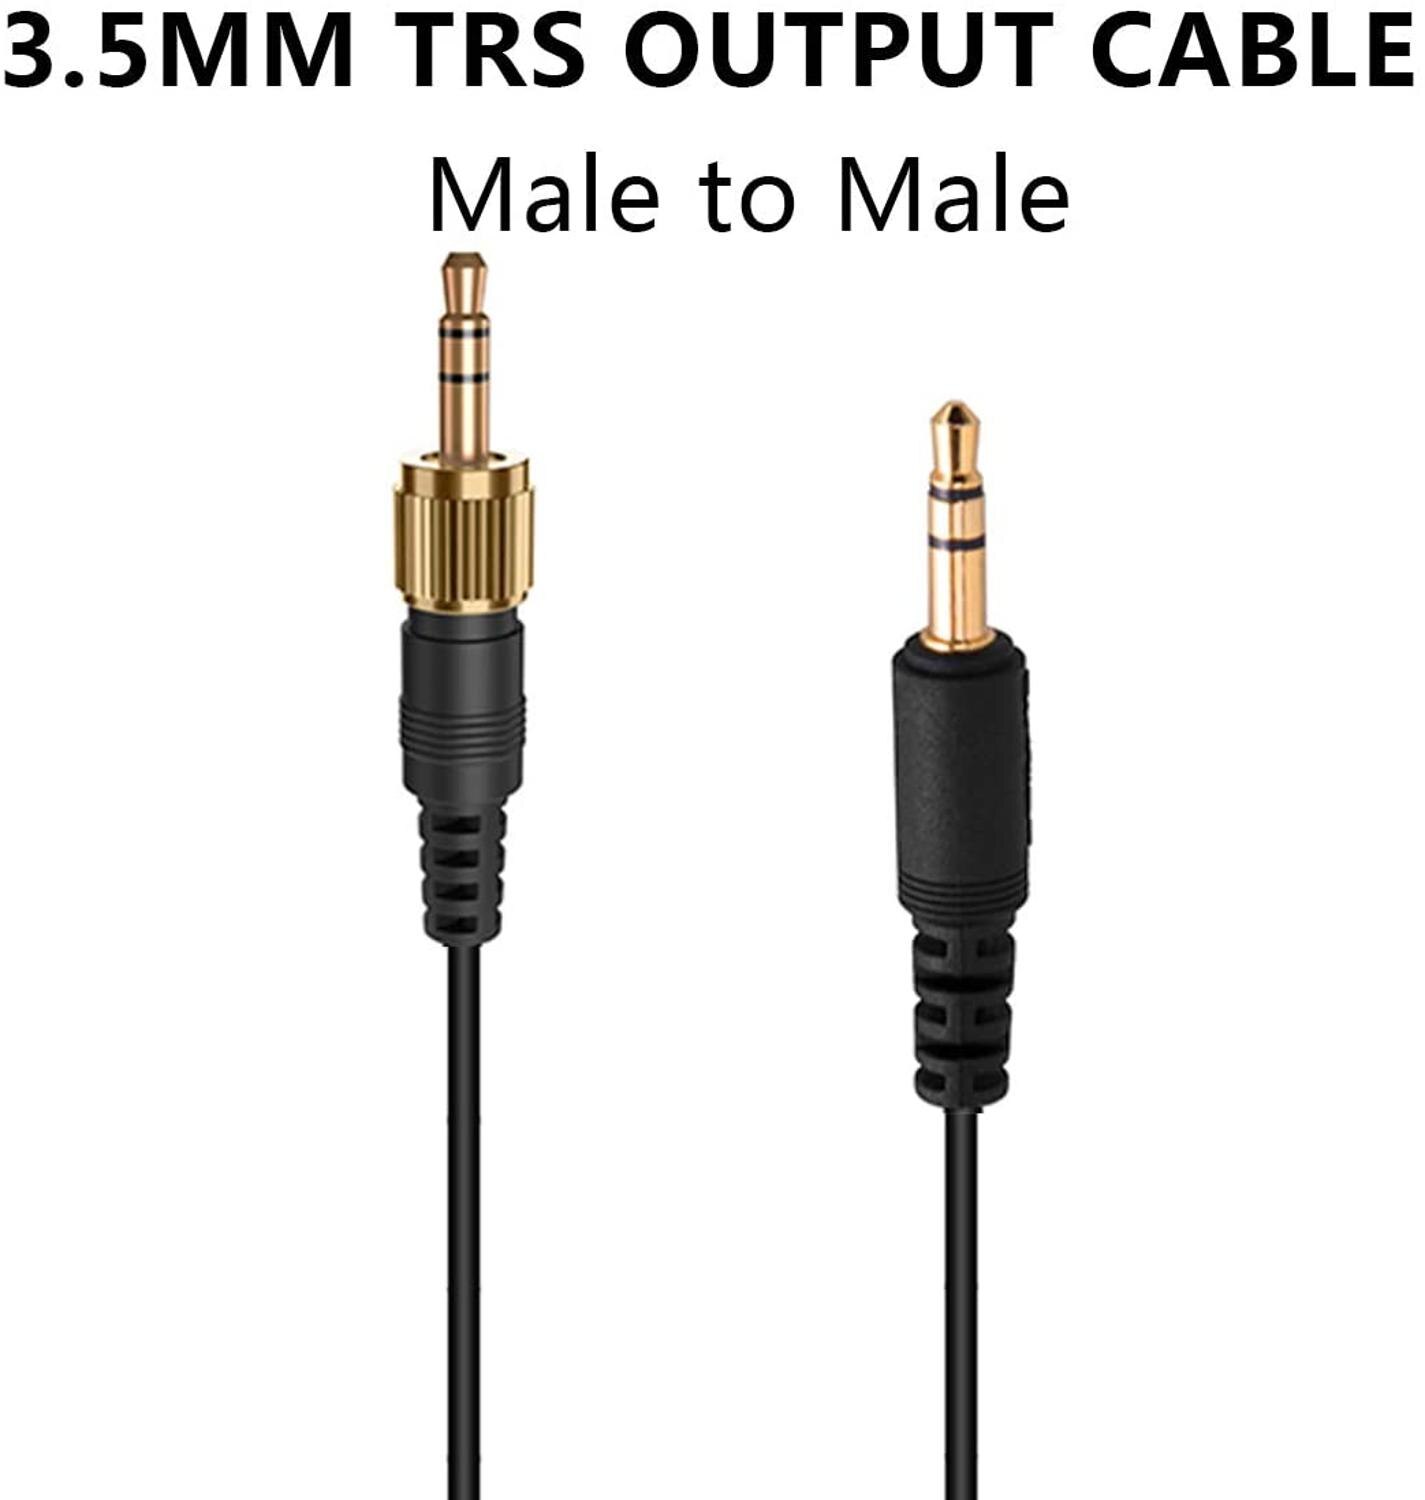 CVM-DL-CPX 3.5mm TRS Audio Input Cable, 3.5mm TRS to TRS Dual Male Cable for COMICA WM200/WM300/WM100 Wireless Microphone